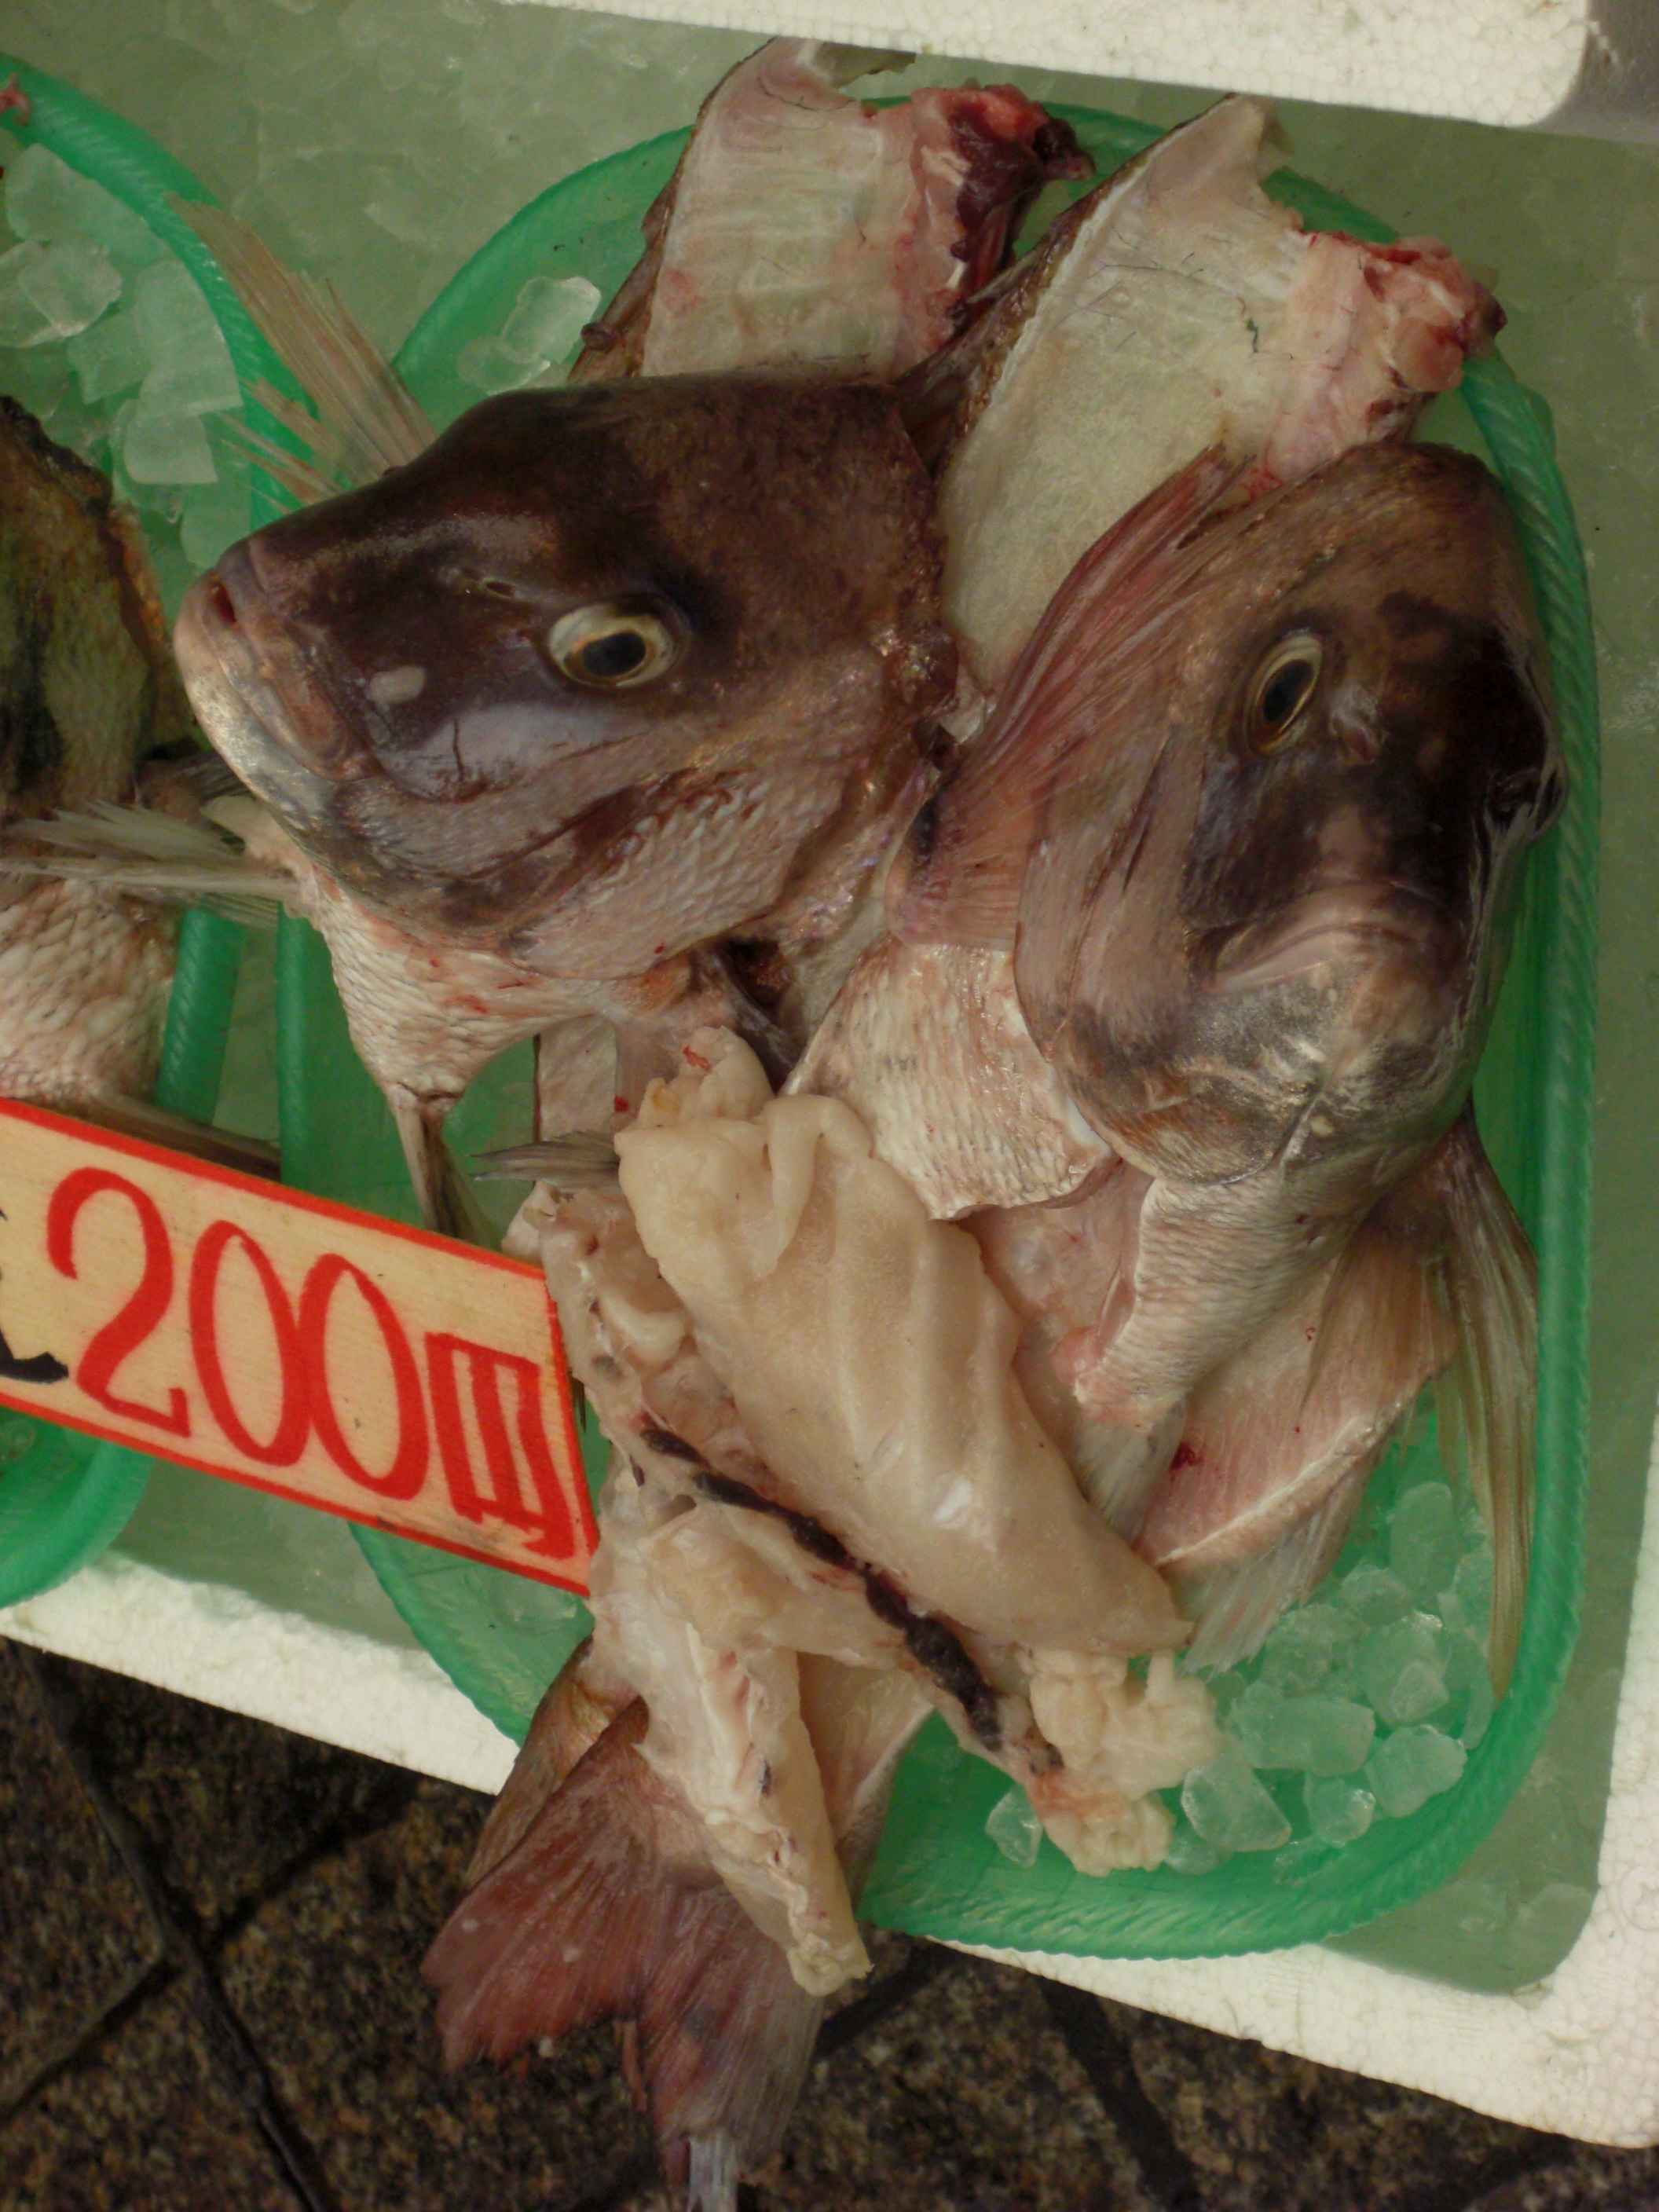 Fish parts on sale at the Akashi Fish Market in Japan, July 2010